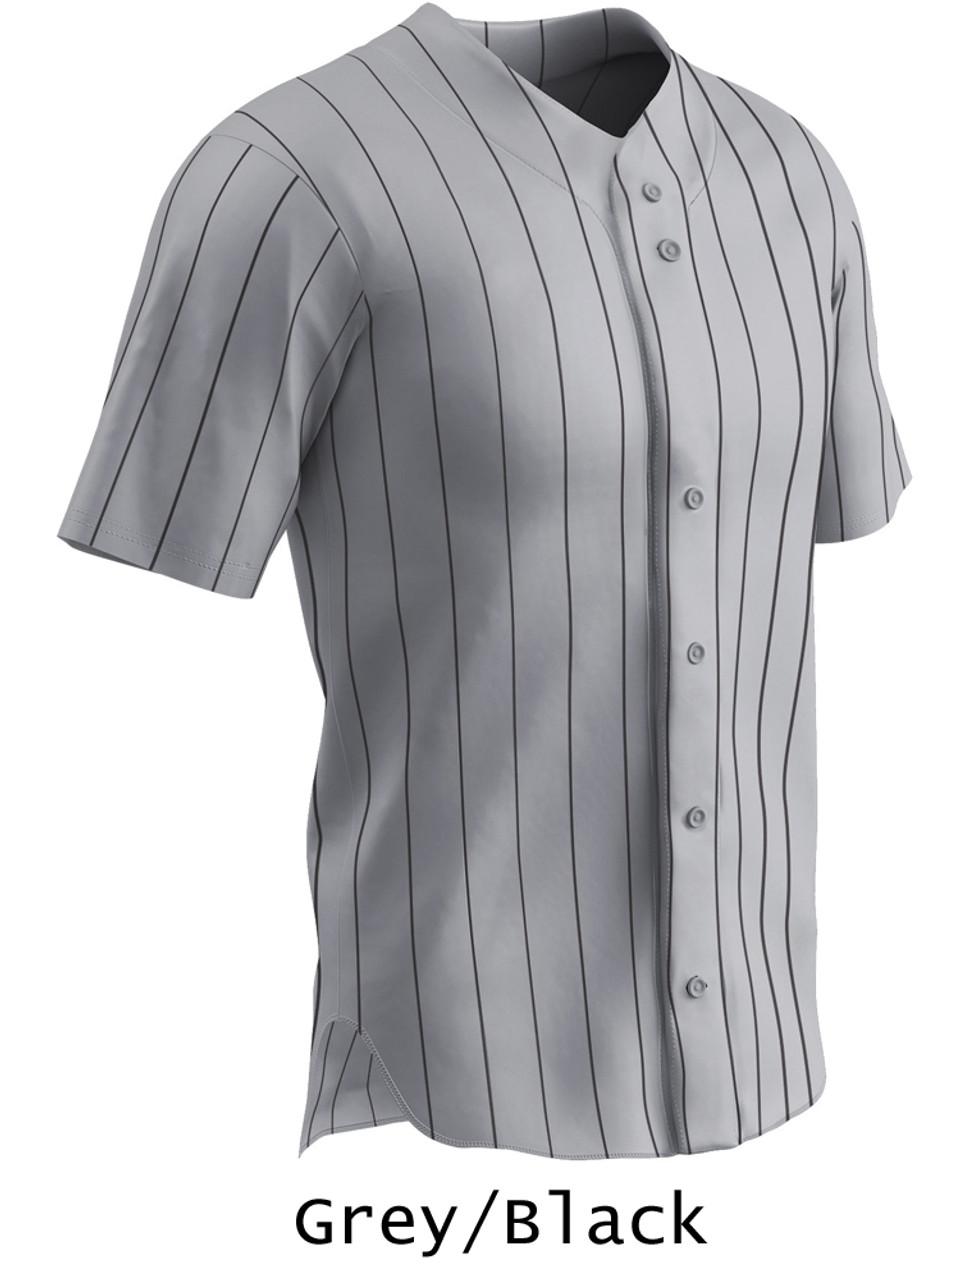 Adult/Youth Pinstripe Prophecy Button Front Baseball Uniform Set - All  Sports Uniforms